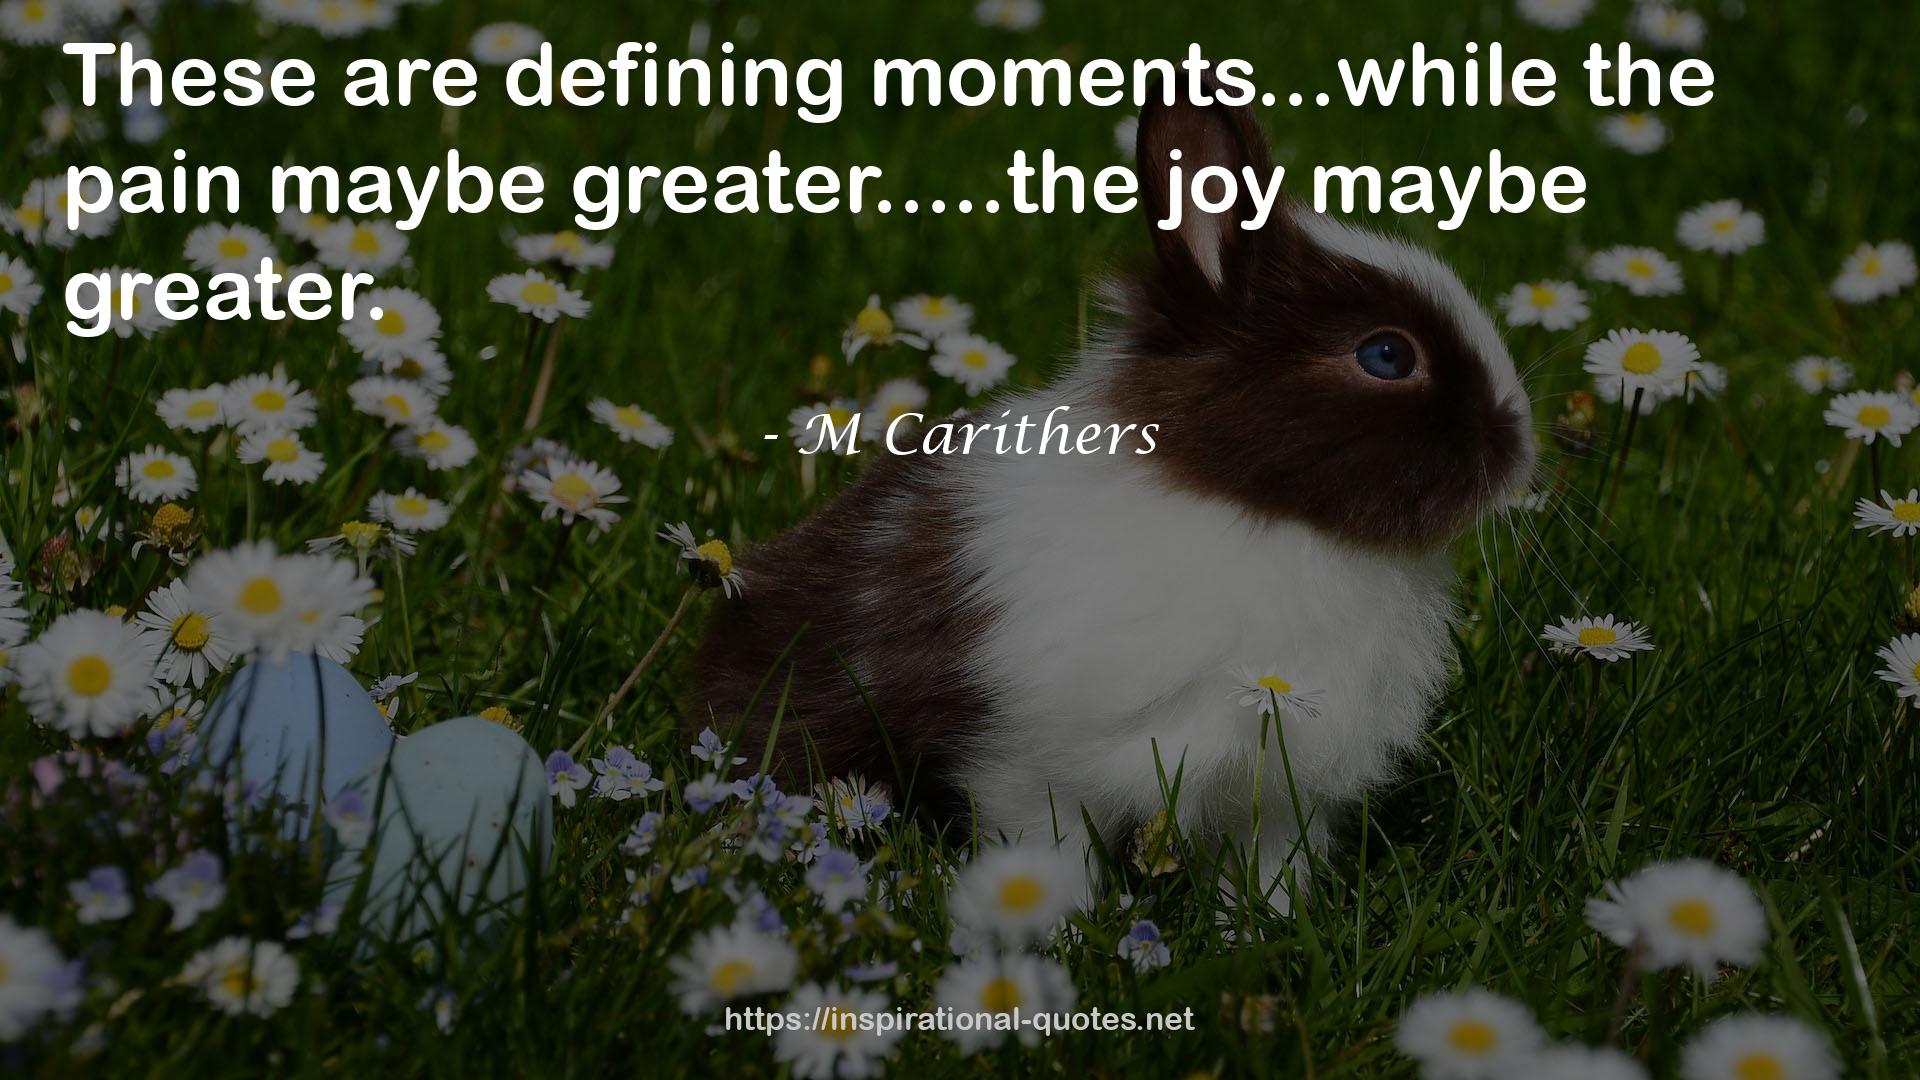 M Carithers QUOTES